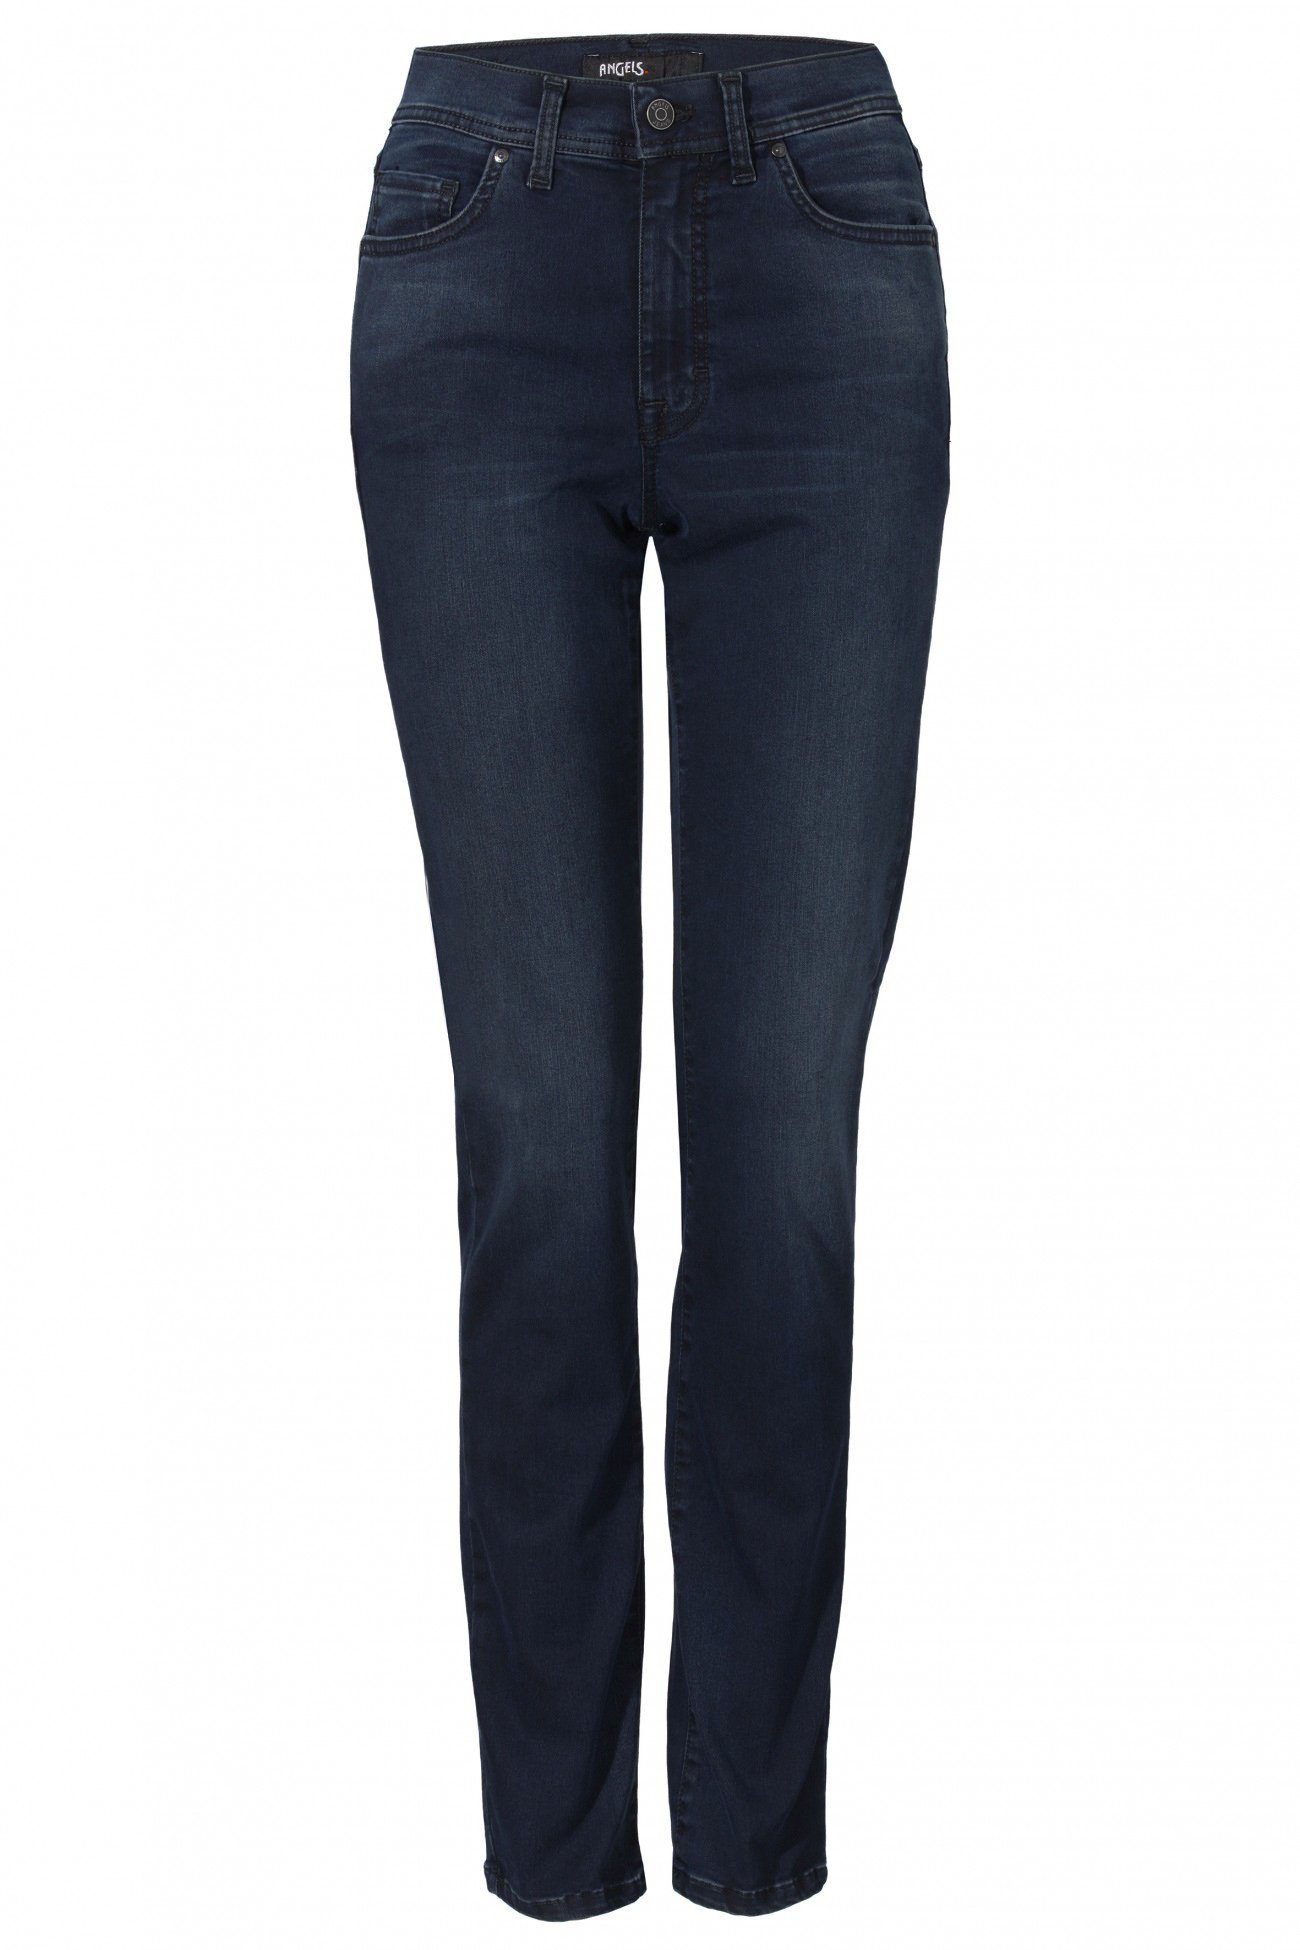 ANGELS Stretch-Jeans ANGELS JEANS CICI night blue 519 34.30 30 night blue